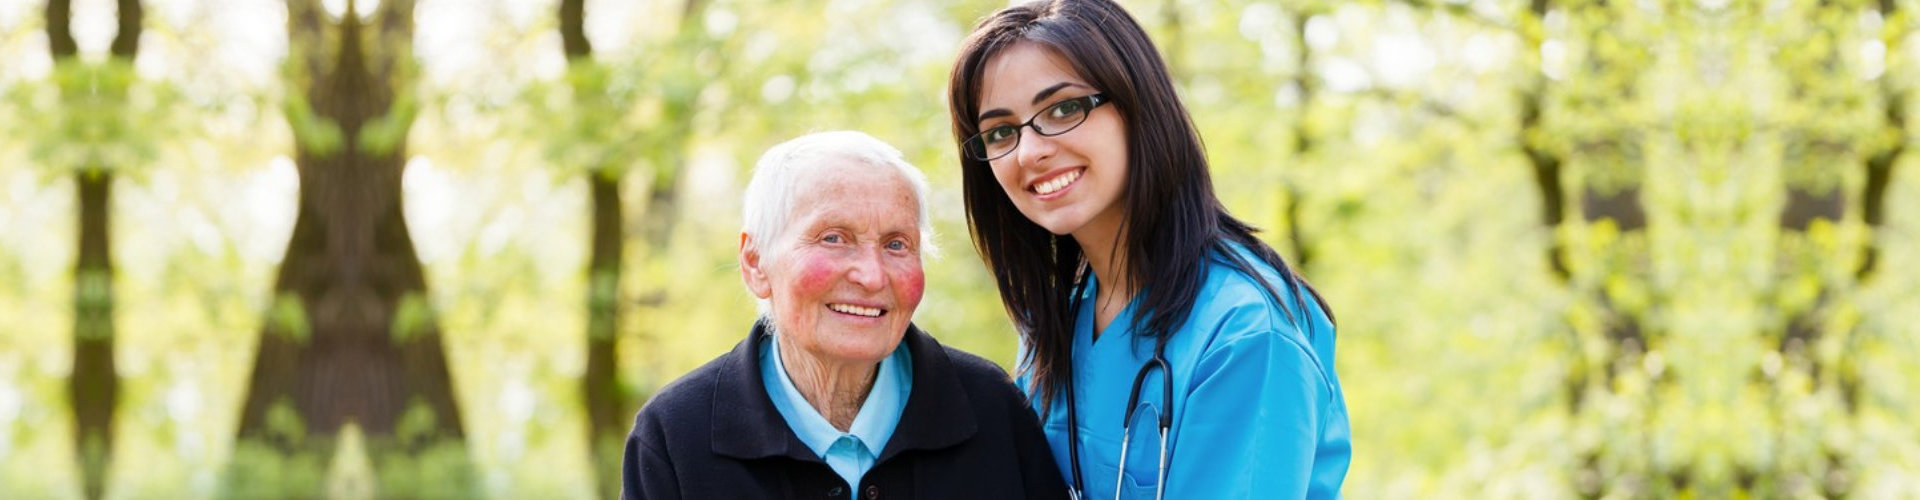 caregiver with elder woman outdoors